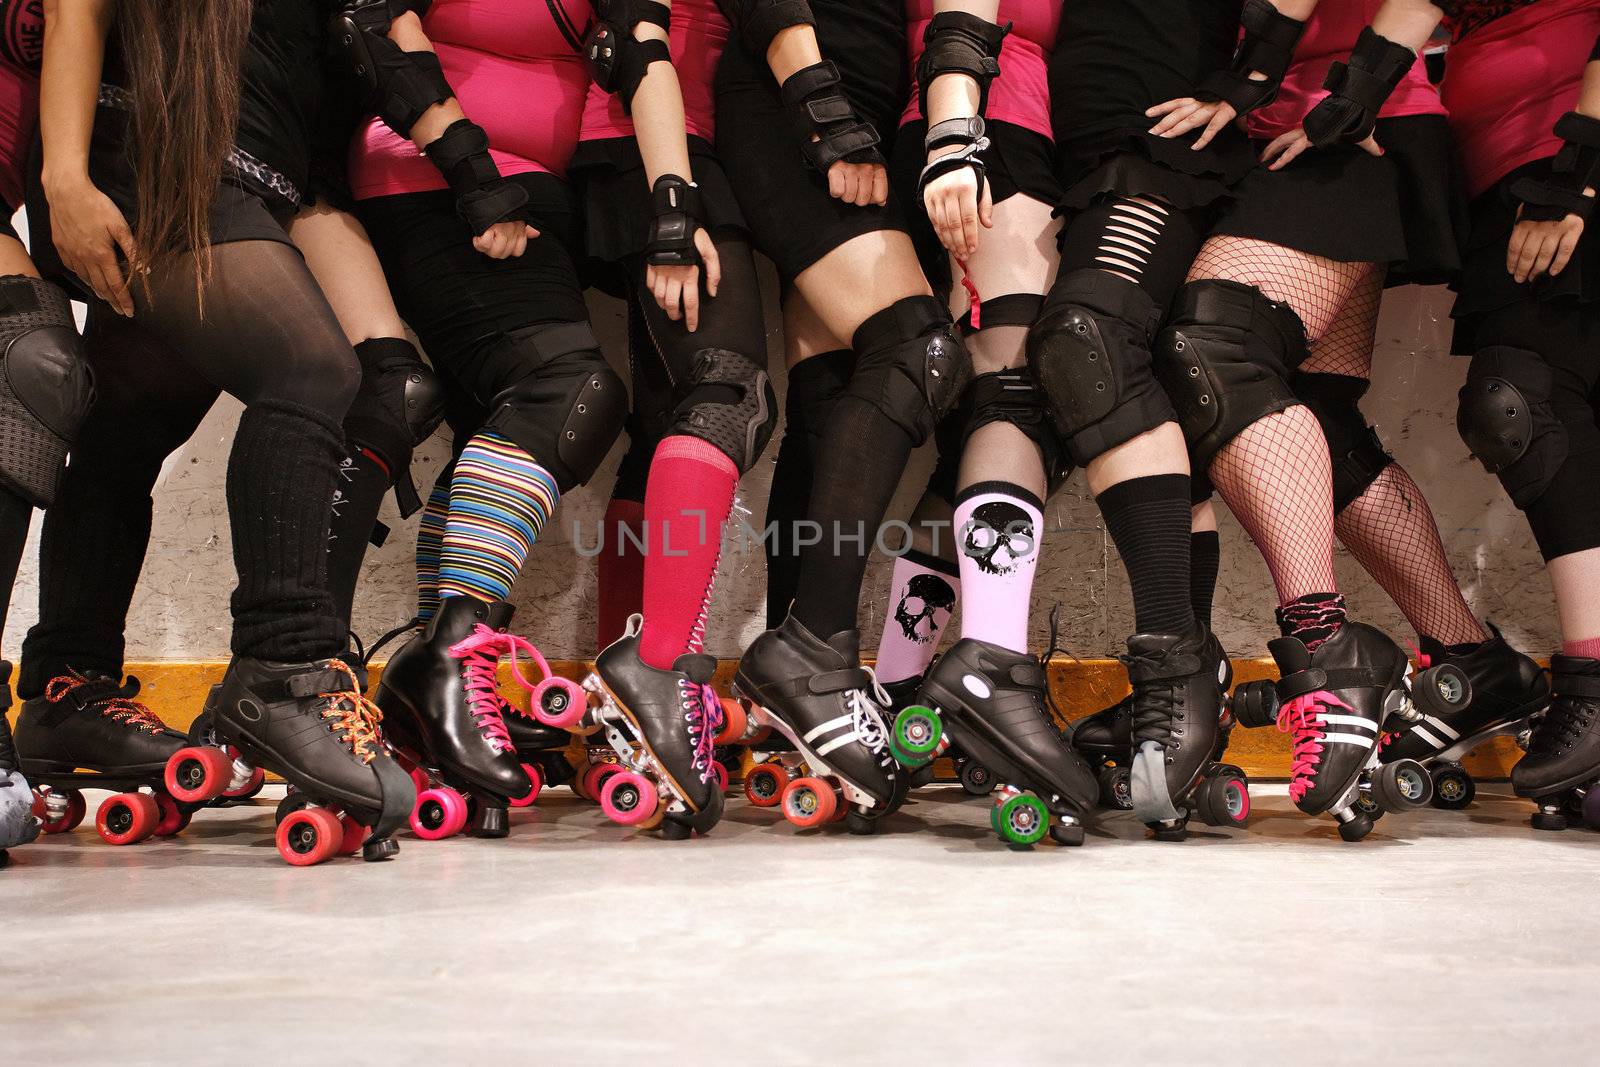 Roller derby team by sumners